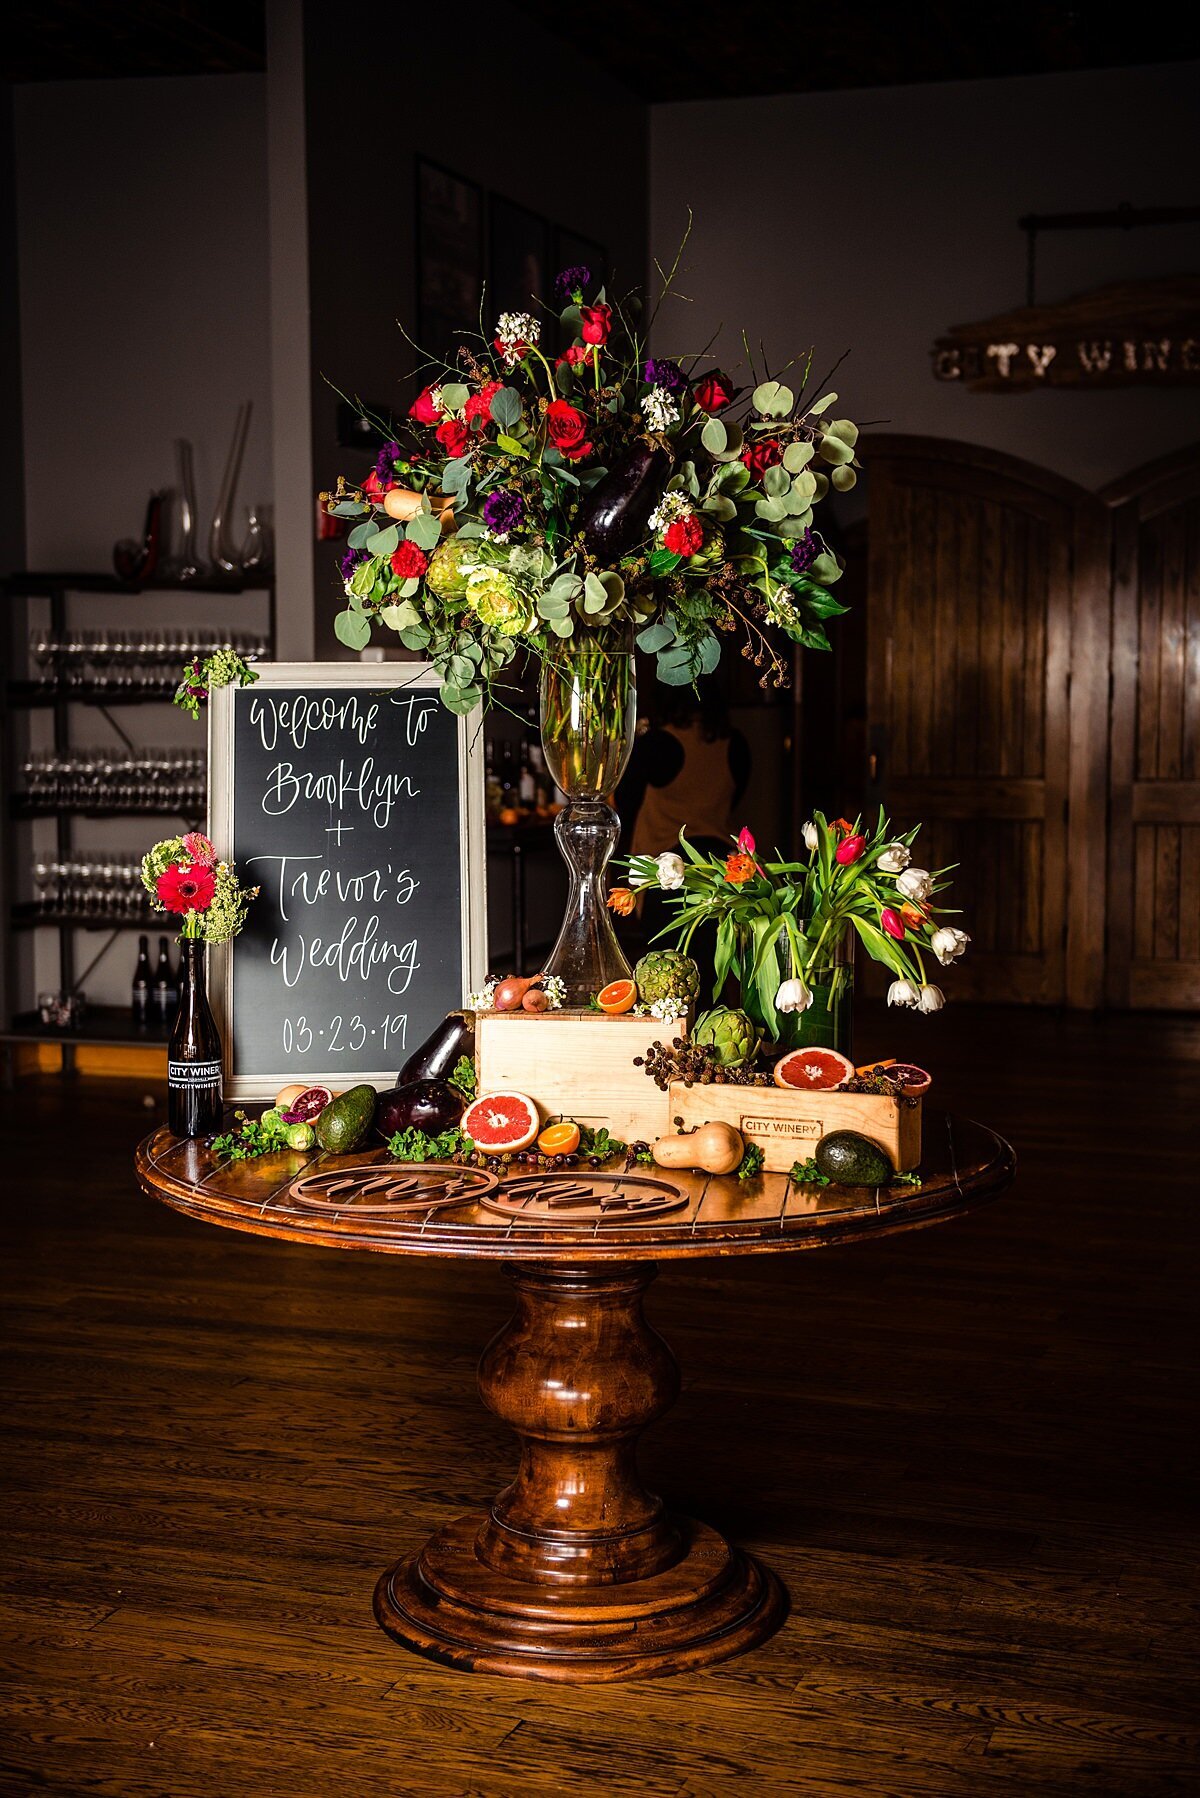 A large dark wood round table is set with a chalkboard sign with white calligraphy sitting next to a tall glass vase brimming with red roses and silver dollar eucalyptus. A low vase sits on the table next to it with white and red tulips. In front of the flowers are two wooden wine boxes with sliced grapefruits, sliced blood oranges, avocados, butternut squash a bottle of City Winery wine and two wooden laser cut signs at City Winery Nashville